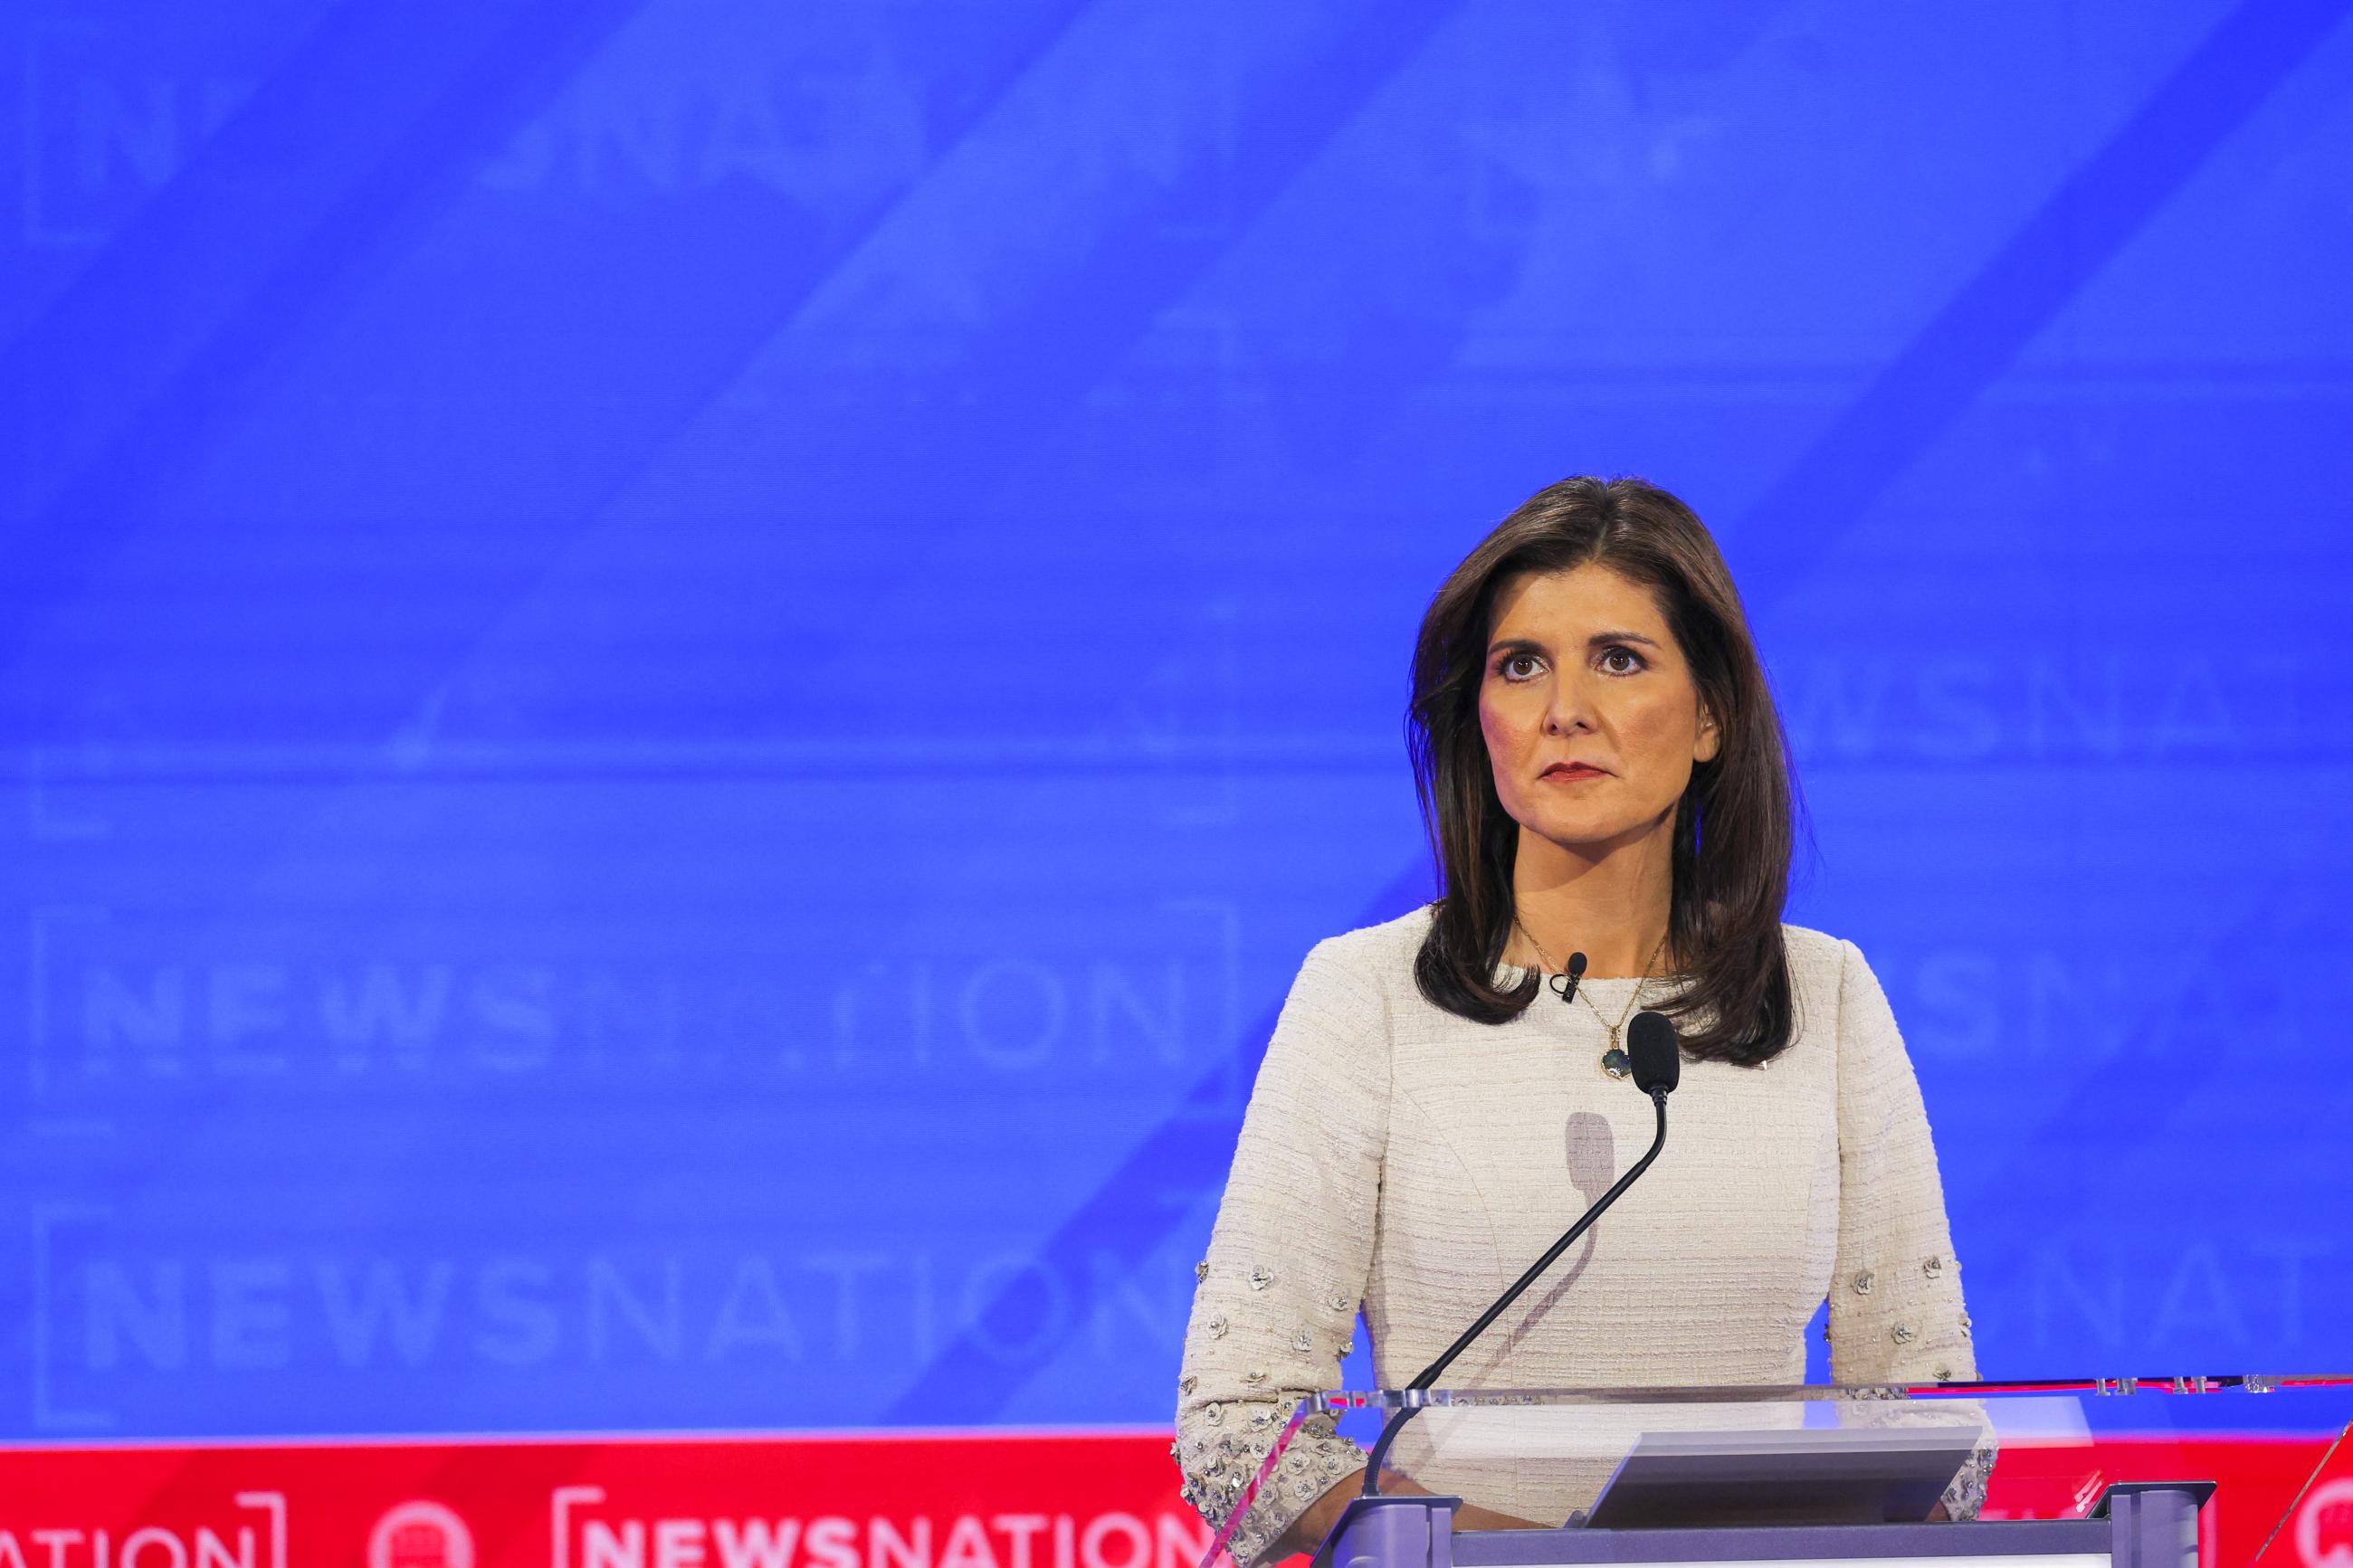 Republican presidential candidate Nikki Haley looks on.